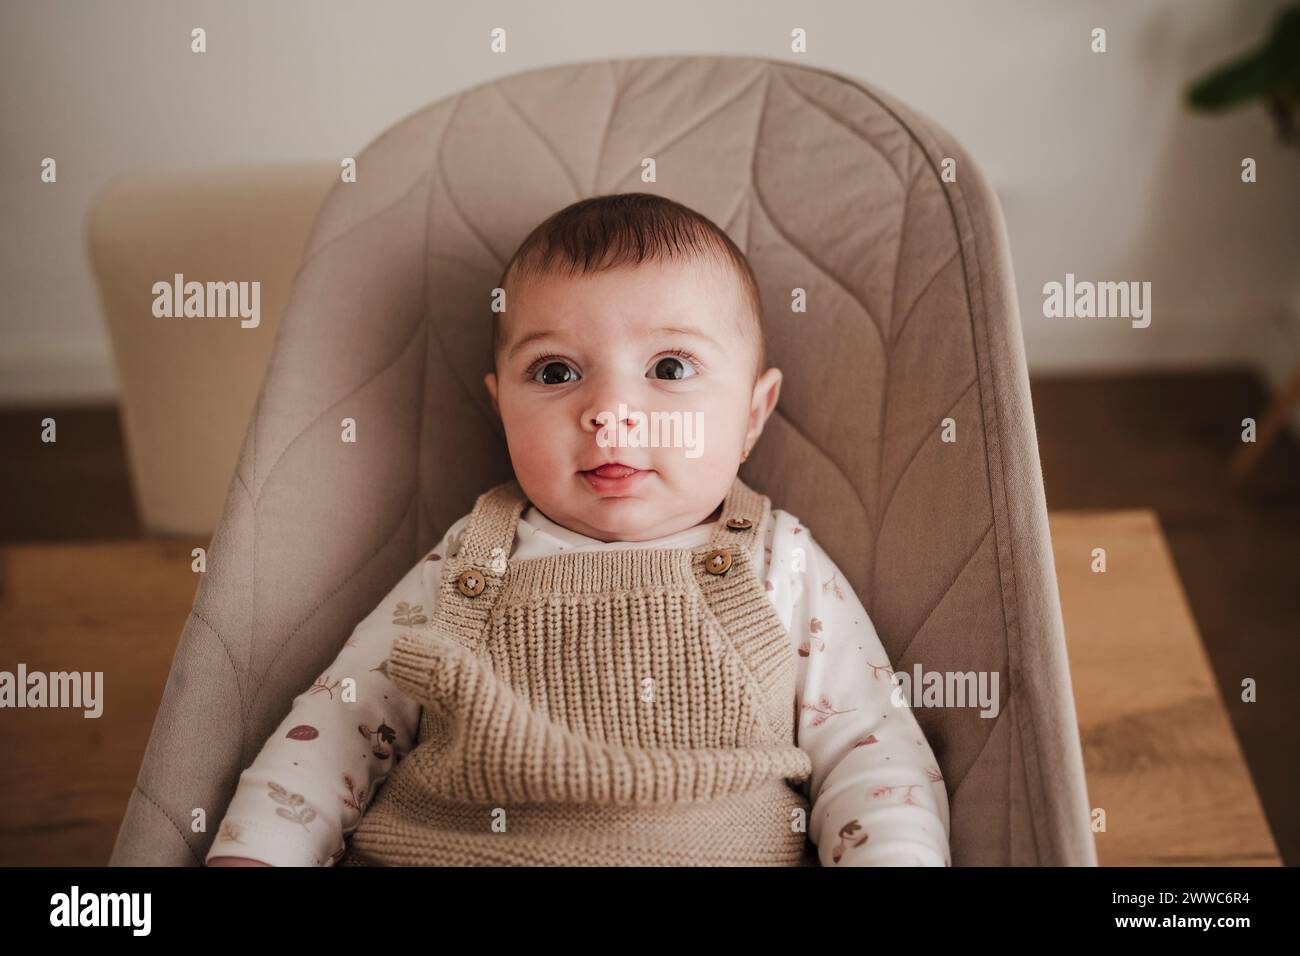 Cute baby girl sitting on bouncer chair Stock Photo